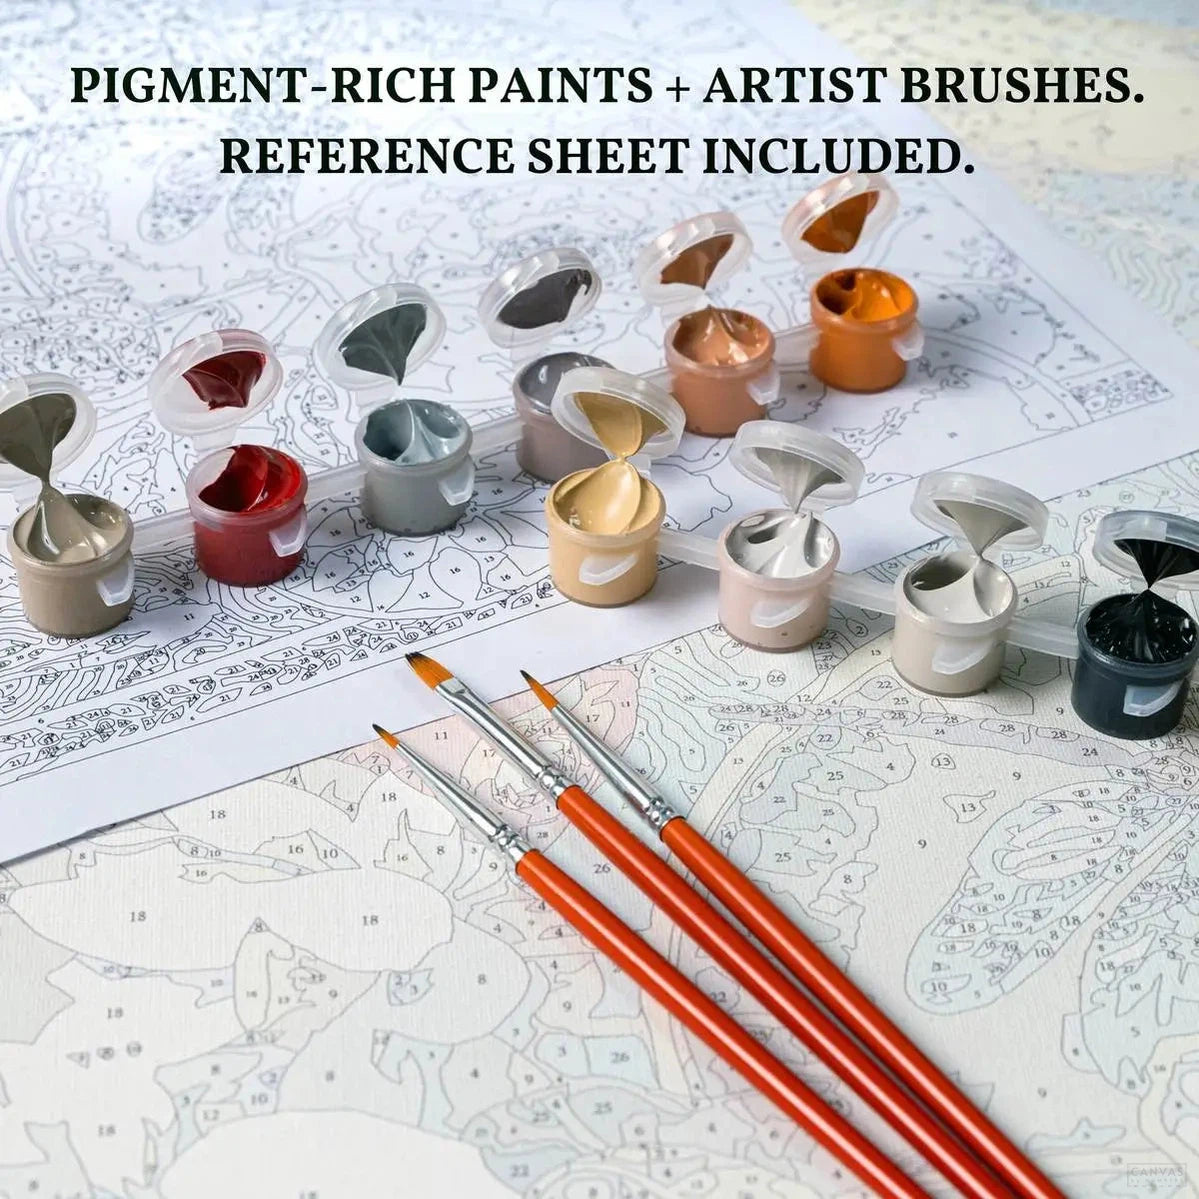 The Prince - Paint by Numbers Kit for Adults-Nestled in her home among beautiful mountaintops, Val Warner paints the world around her with depth and reverence. Prince is a tiger paint by numbers kit.-Canvas by Numbers